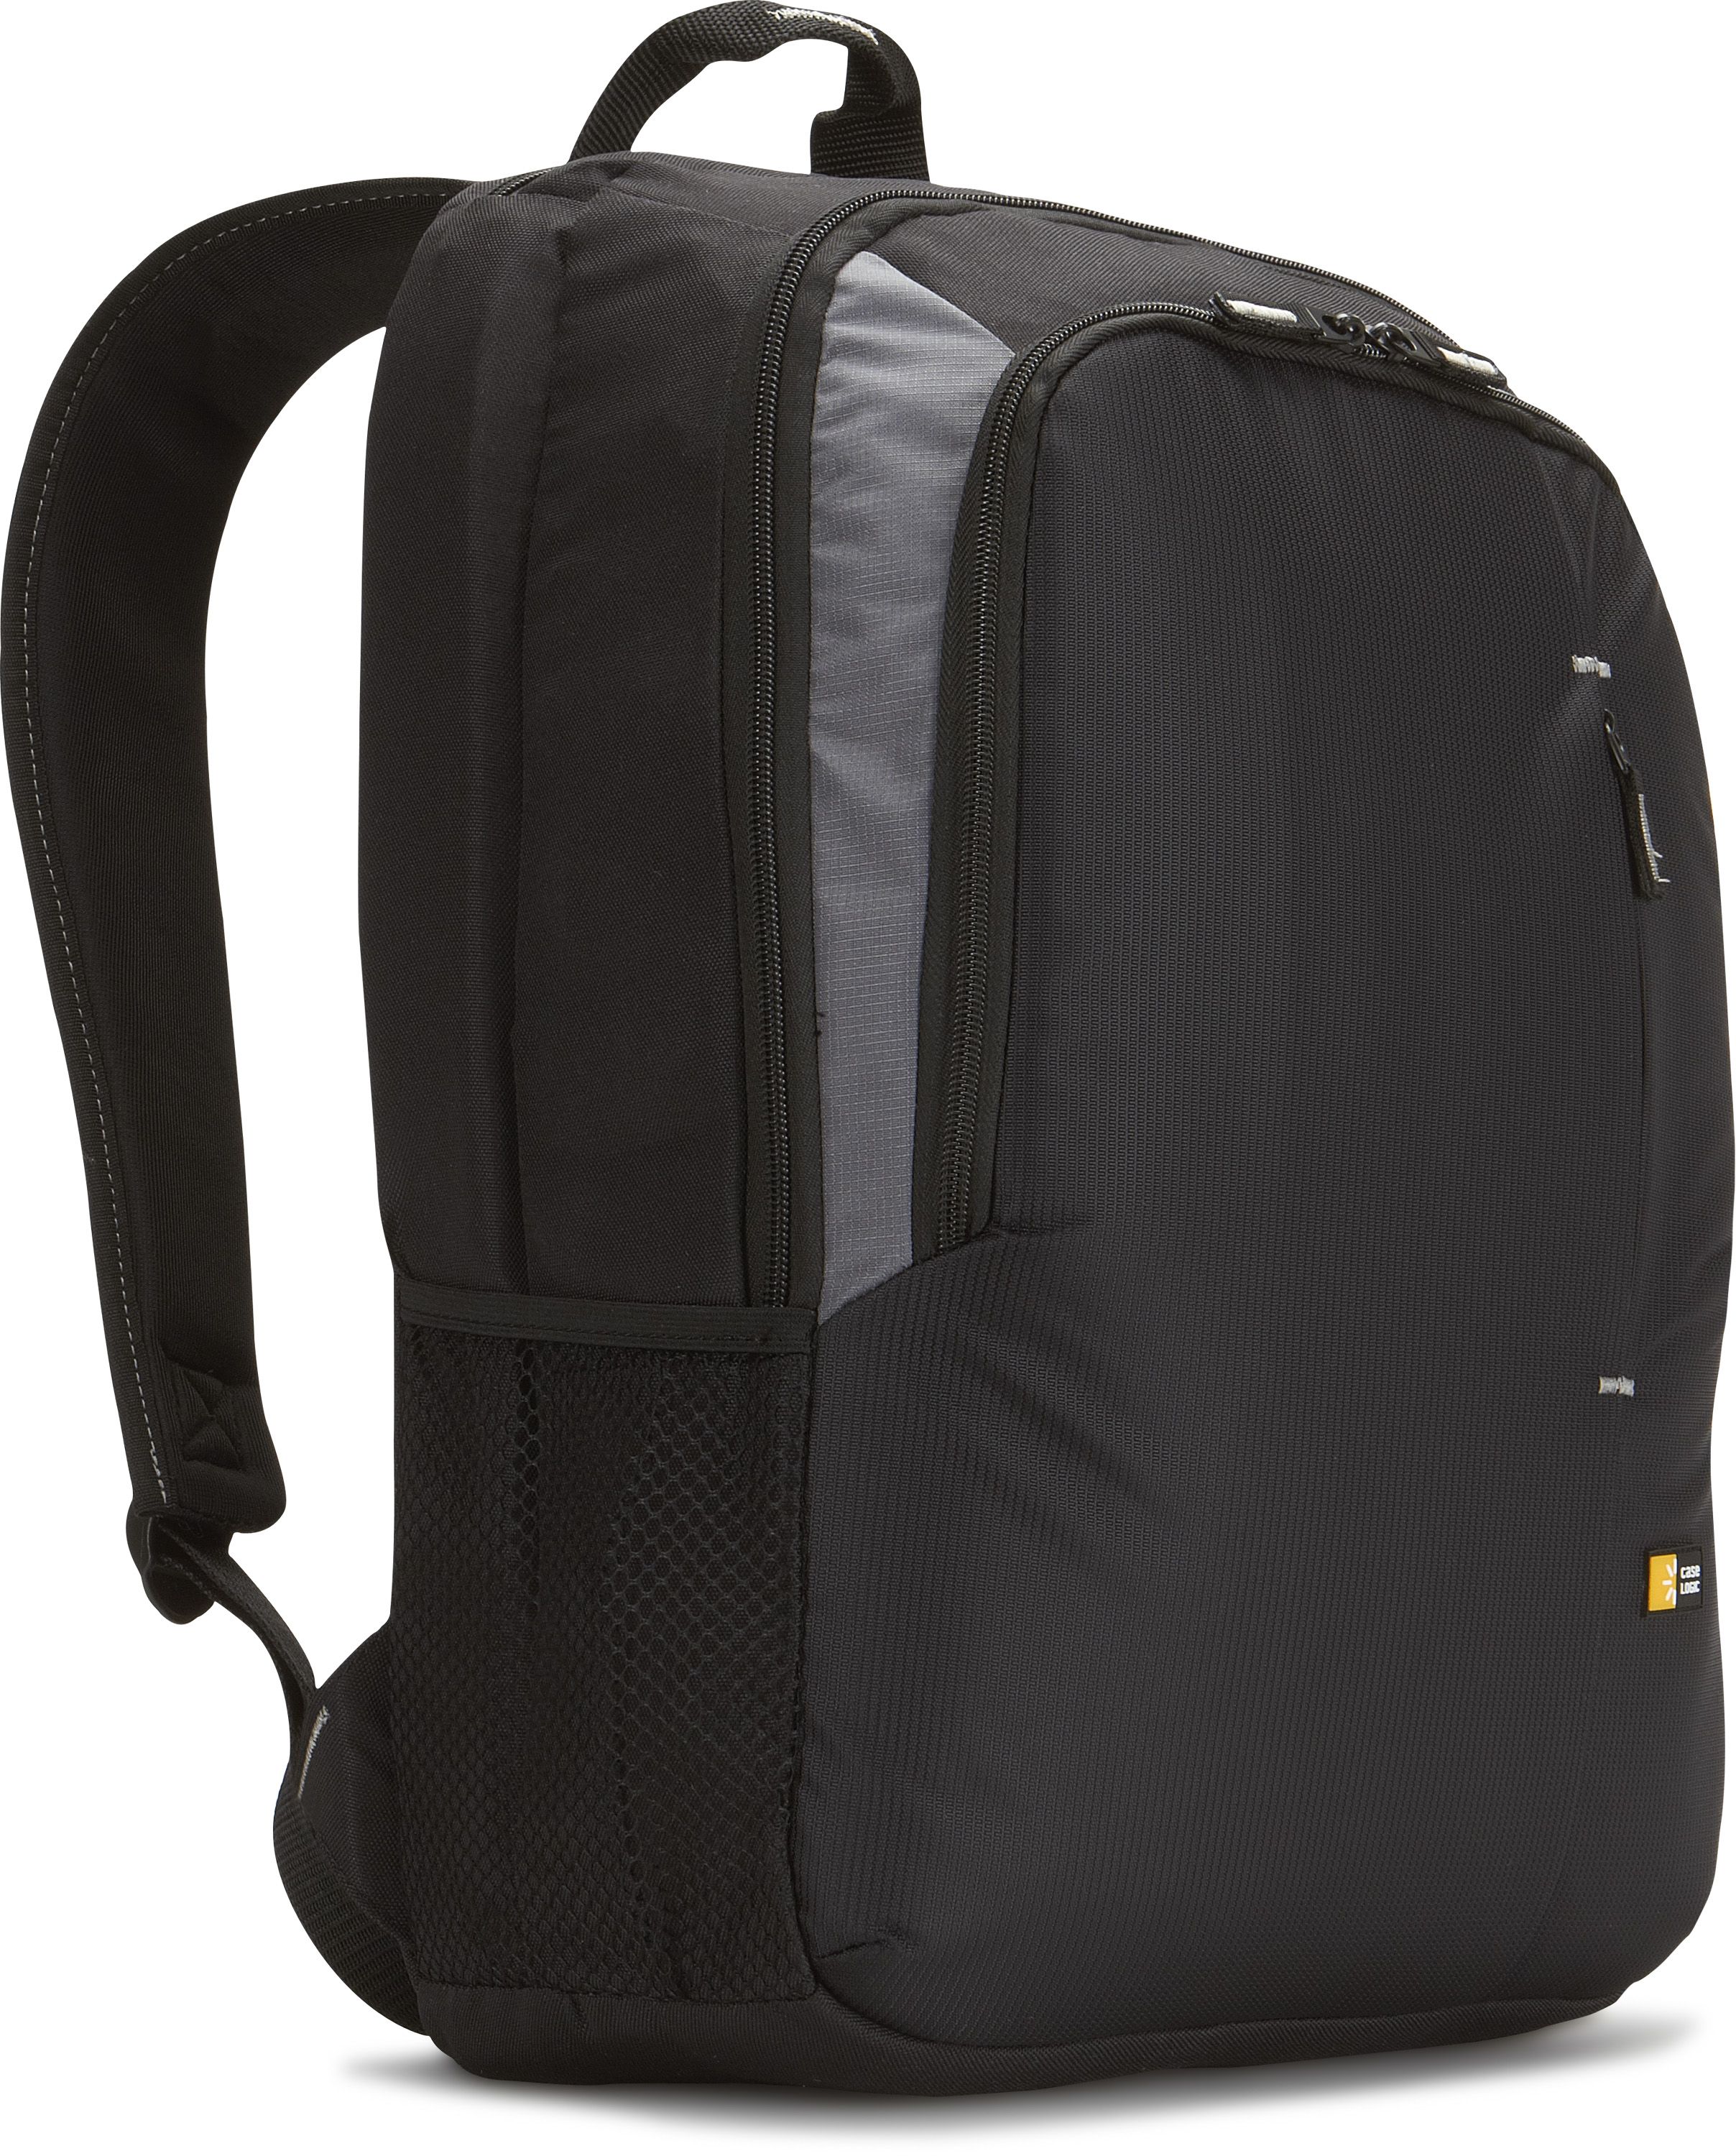 17.3 Laptop Backpack w/ Removable Accessory Case